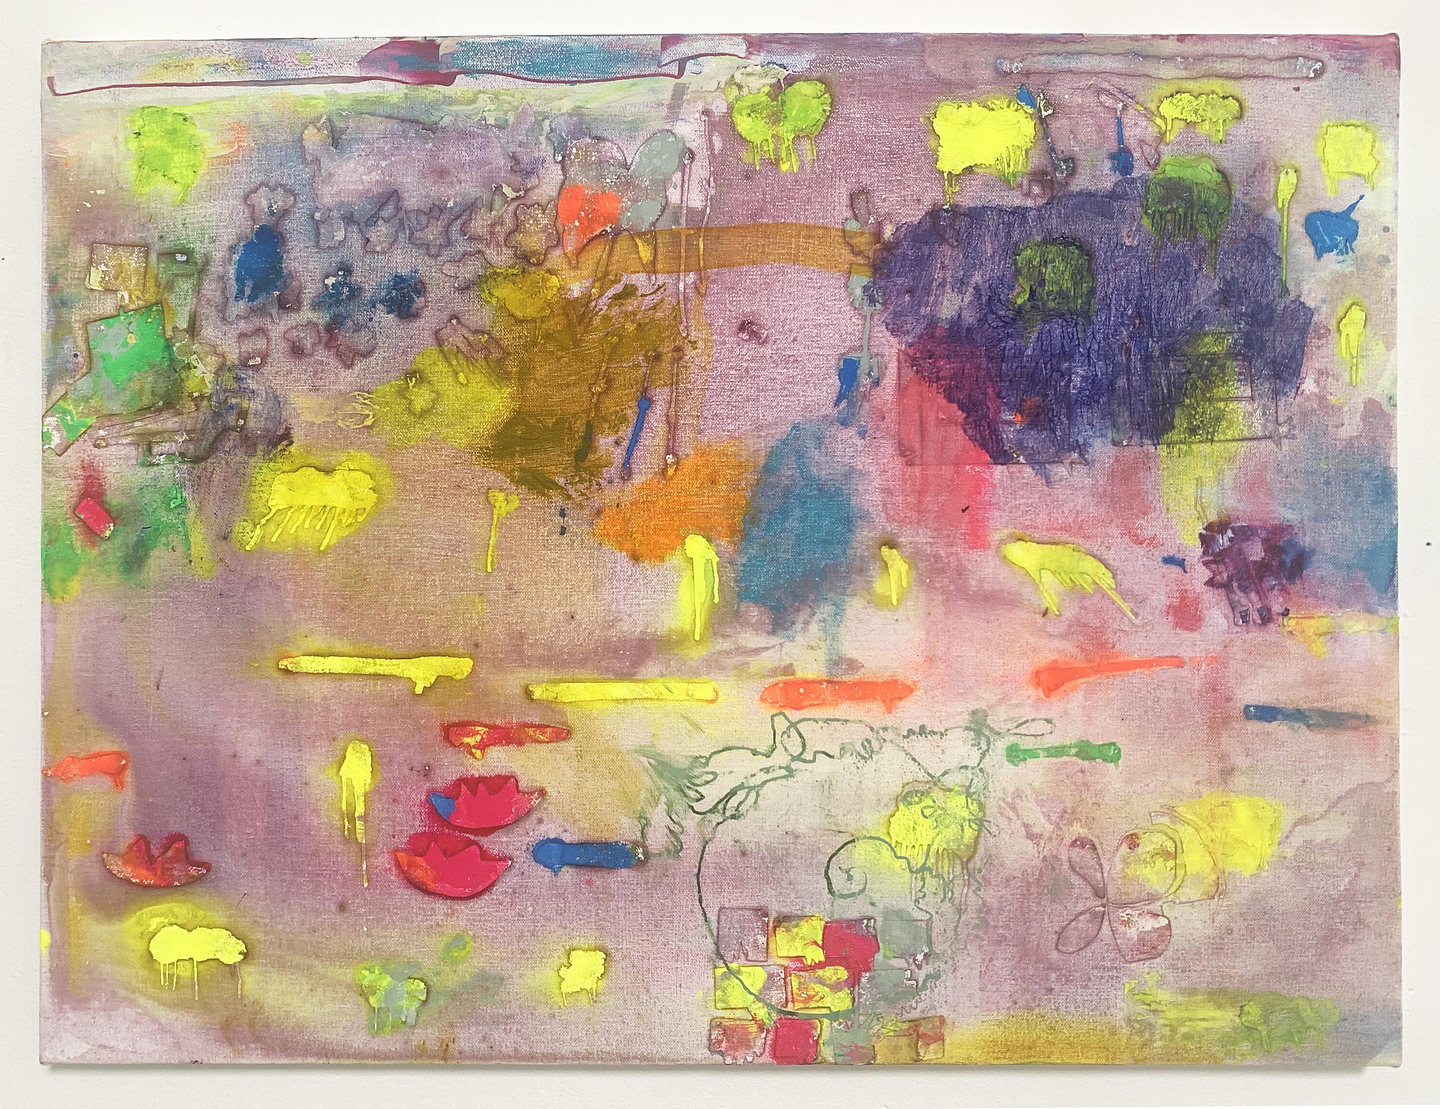 An abstract watercolour and oil painting by Rachelle Sawatsky. The horizontal canvas is lightly washed with purple and yellow pigment, which overlap and bleed in areas to create muddy pools of colour. Gestural shapes in neon yellow, orange, pink, purple, green, and blue hues are layered on top in a dynamic composition. Drips, blots, smears, and scratches from visible brush strokes add texture to the work.